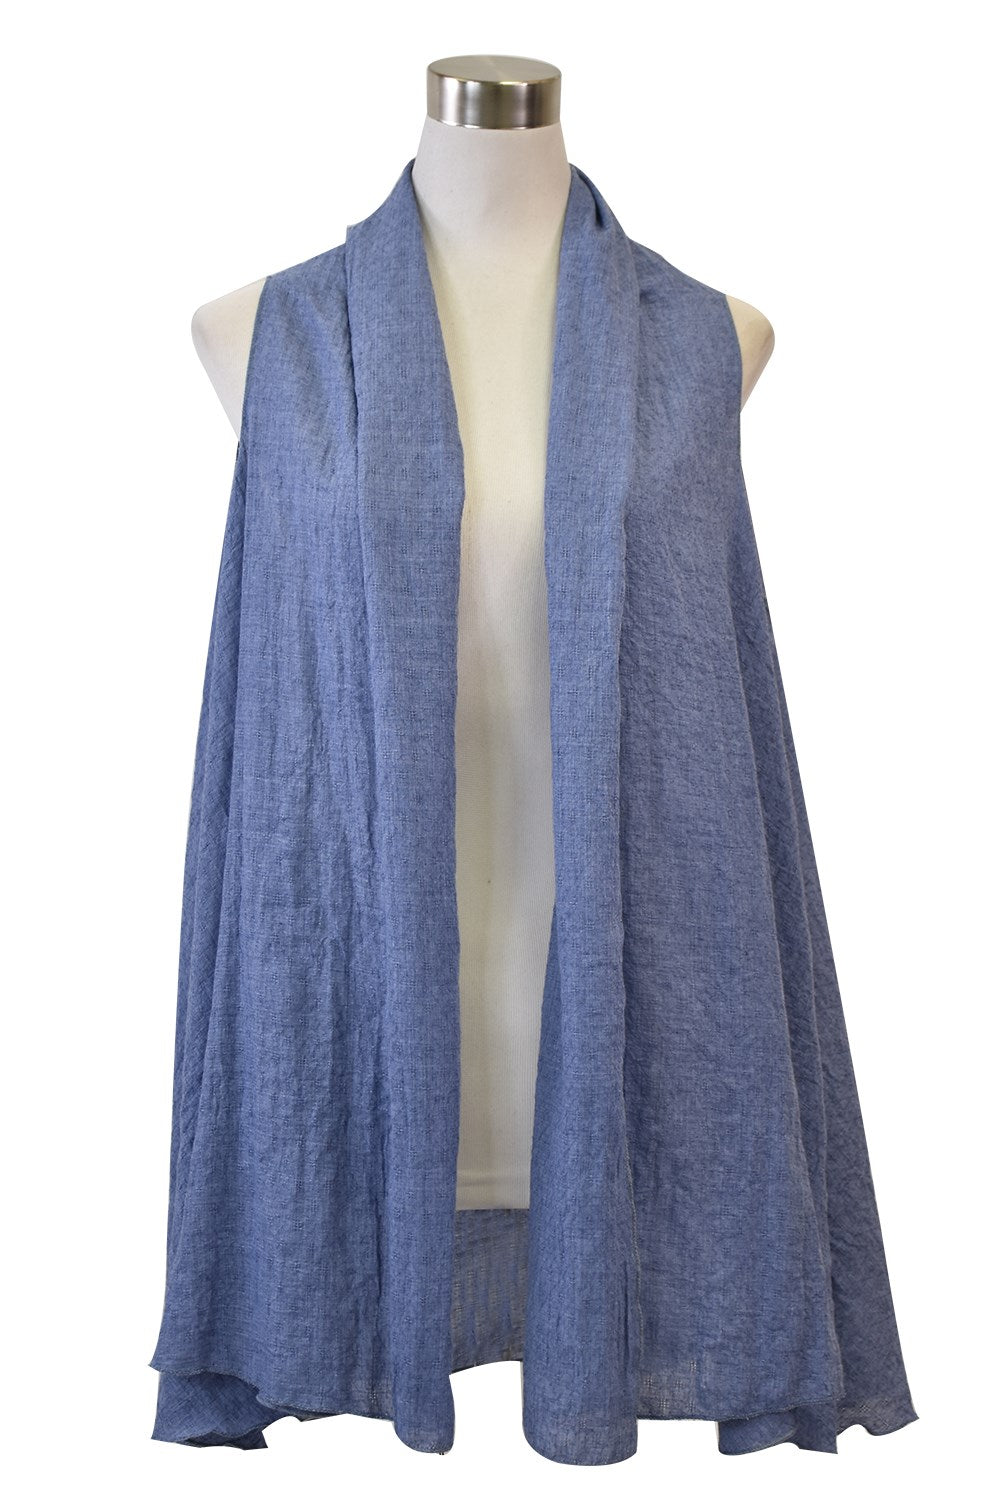 Spring and Summer Chambray Vest Cover Up